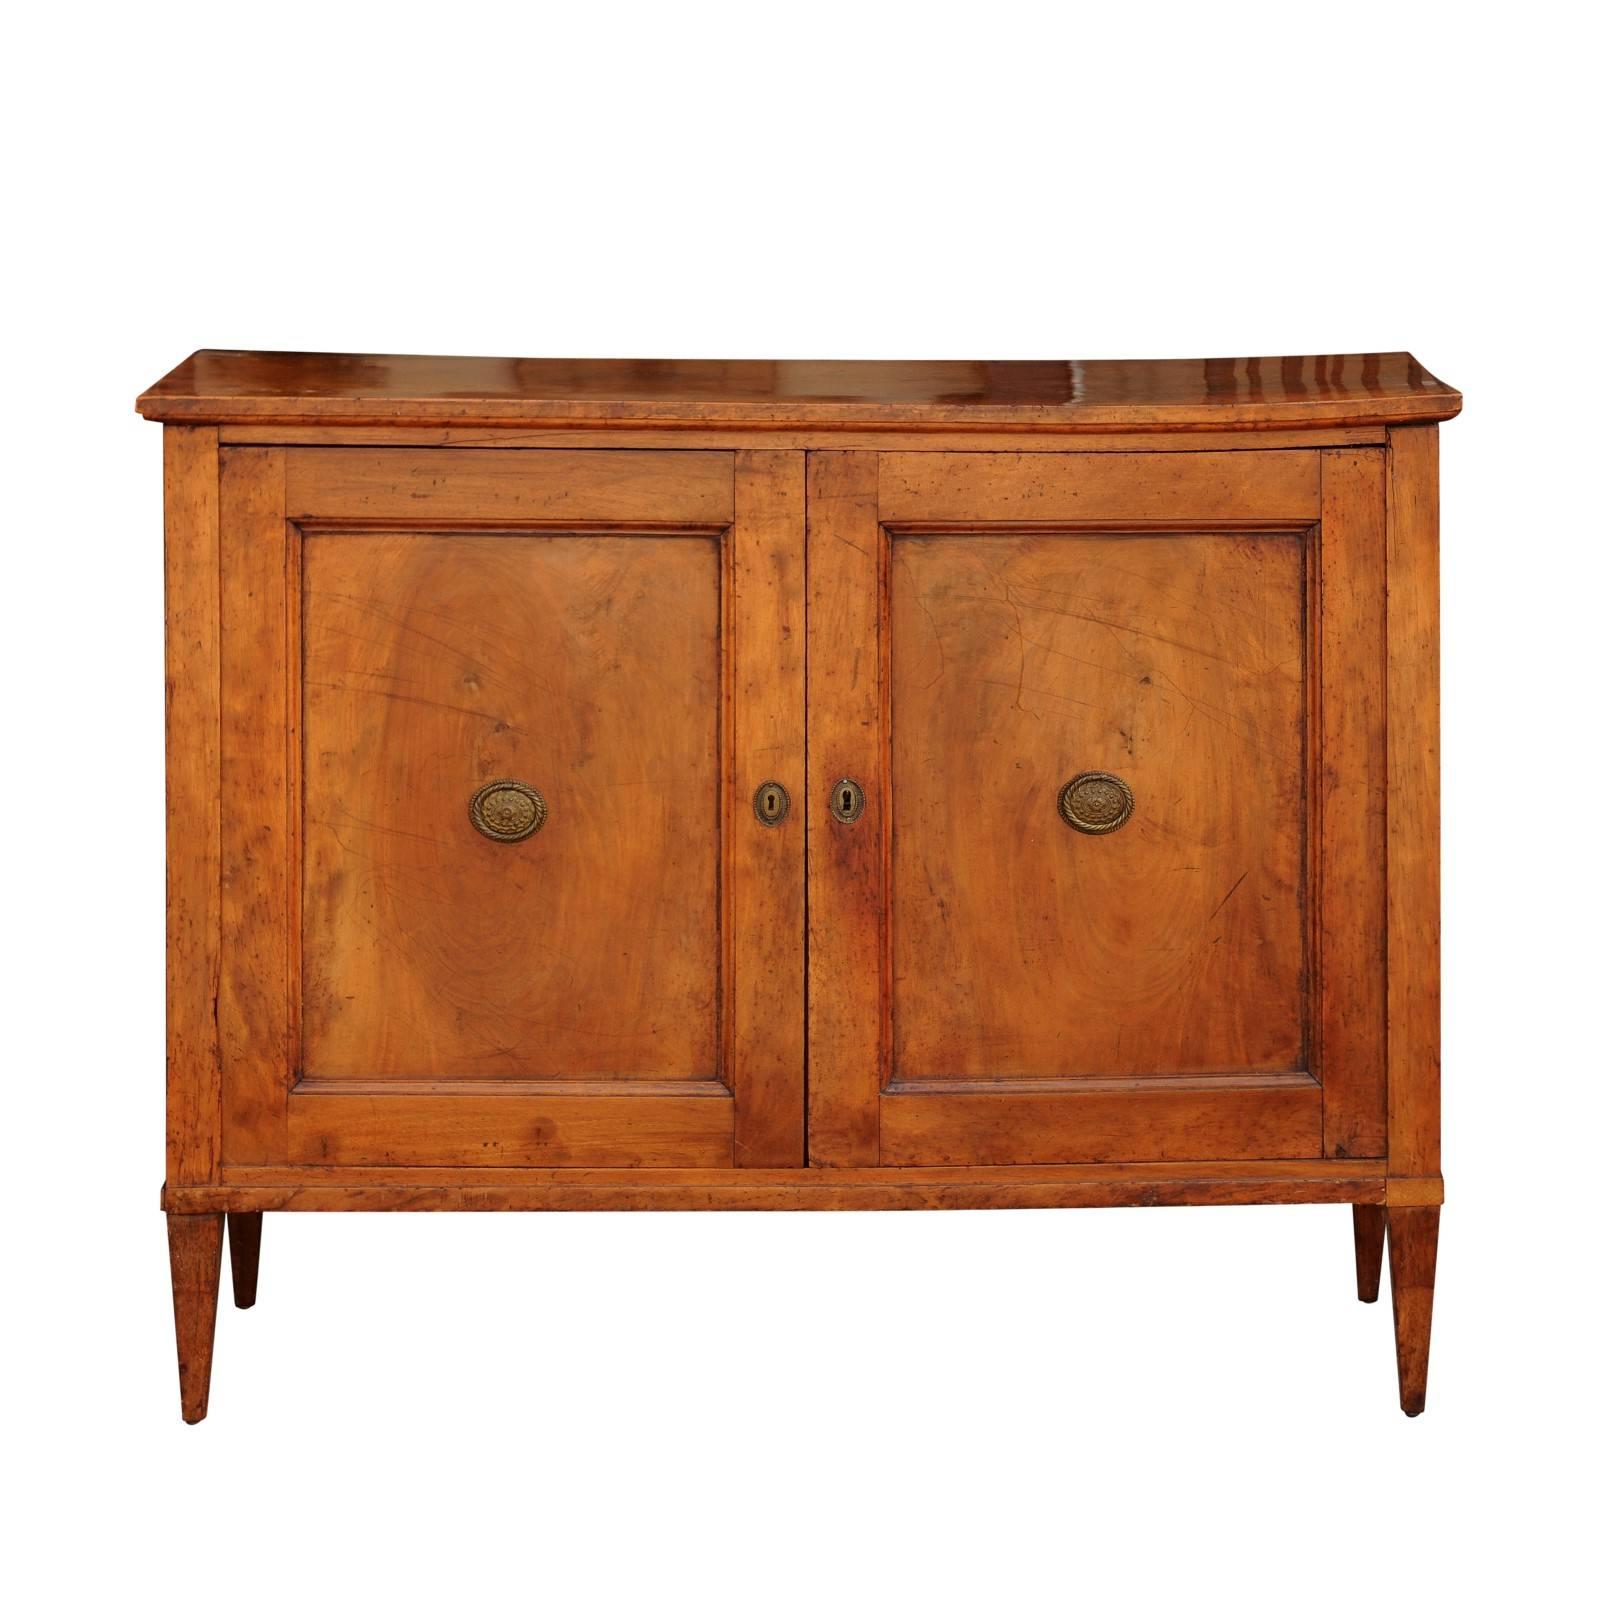 French 1820s Neoclassical Period Two-Door Walnut Buffet with Drawers and Shelves For Sale